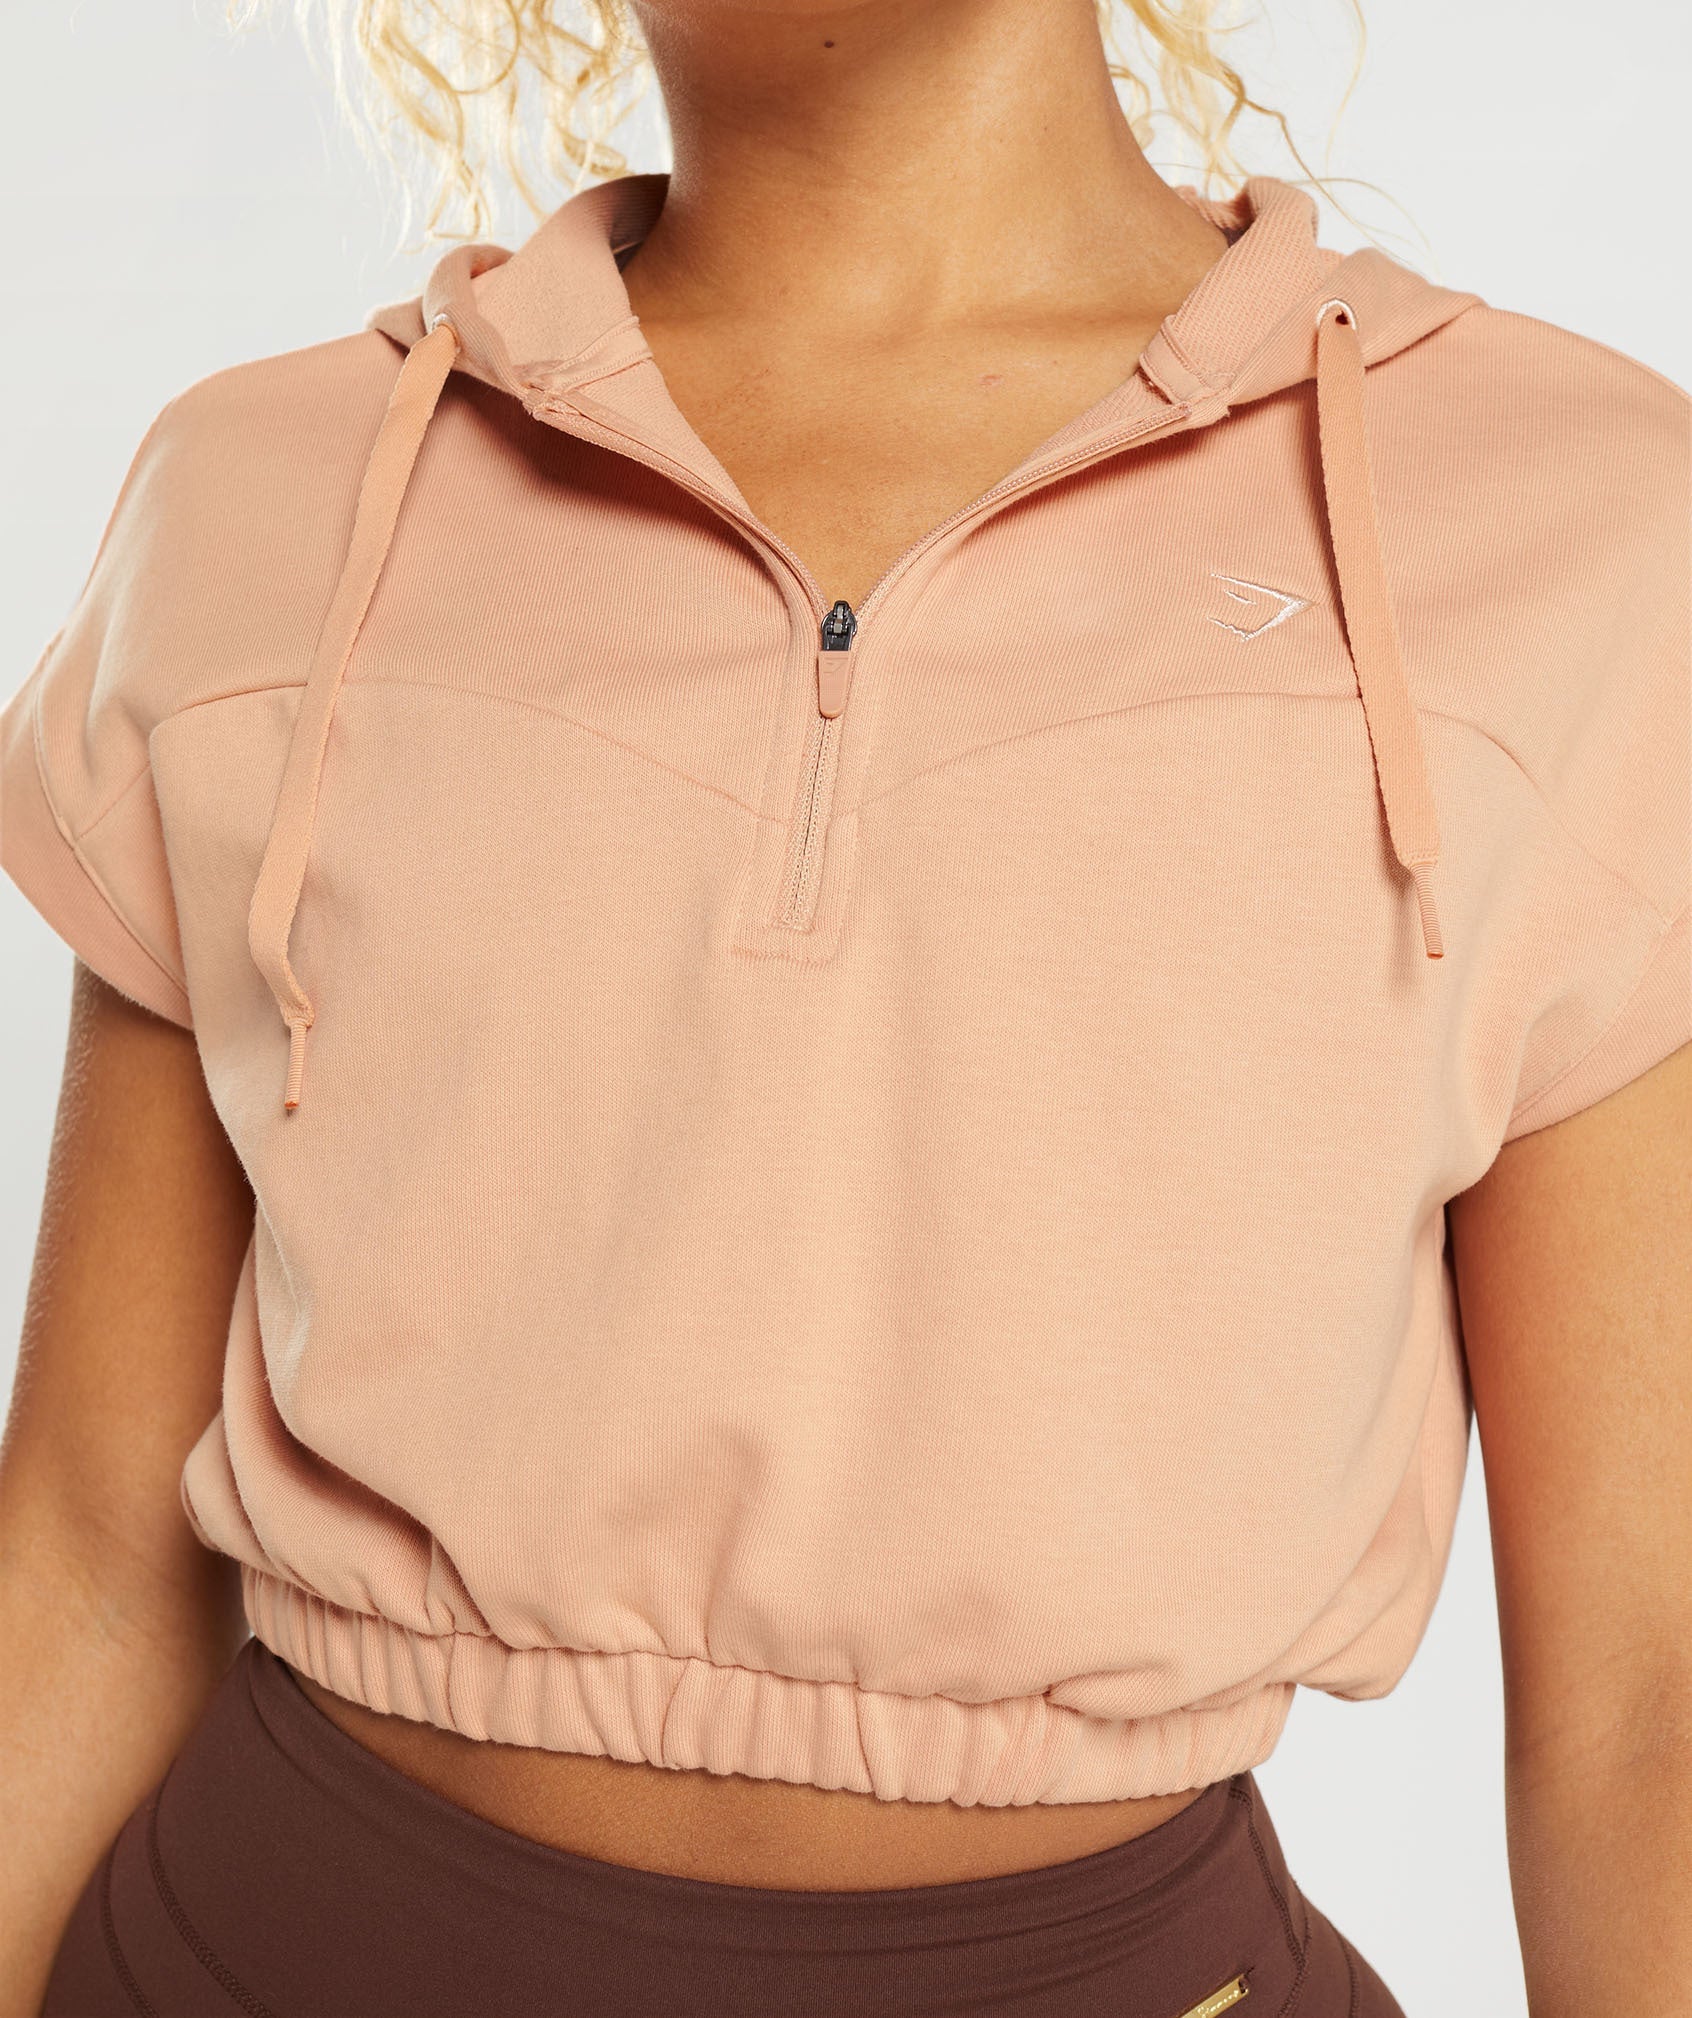 Whitney Cropped Sleeveless Hoodie in Sunset Beige - view 6